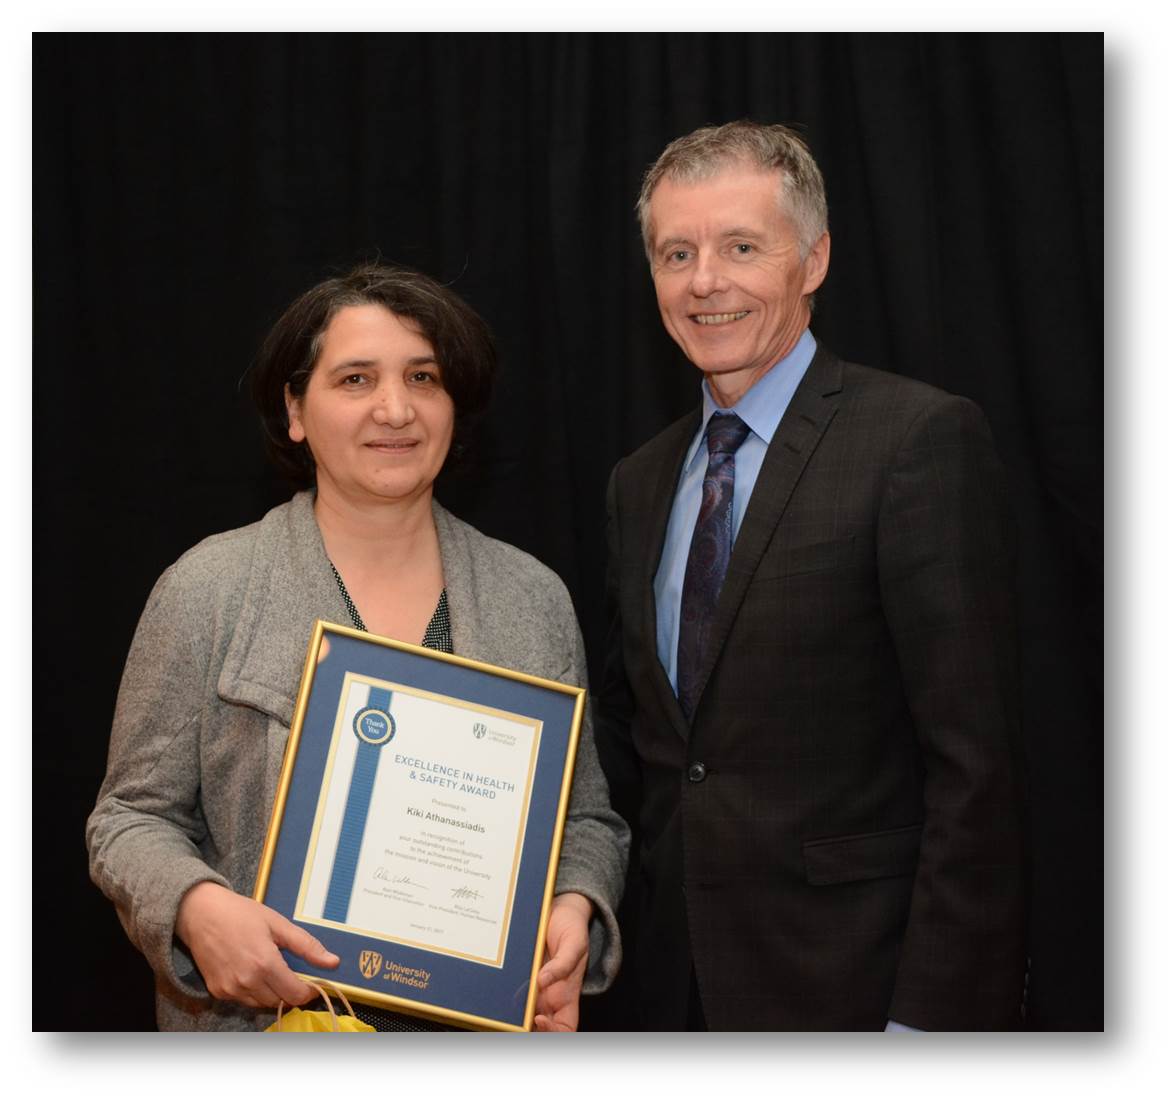 Excellence in Health and Safety Award recipient Kiki Athanassiadis